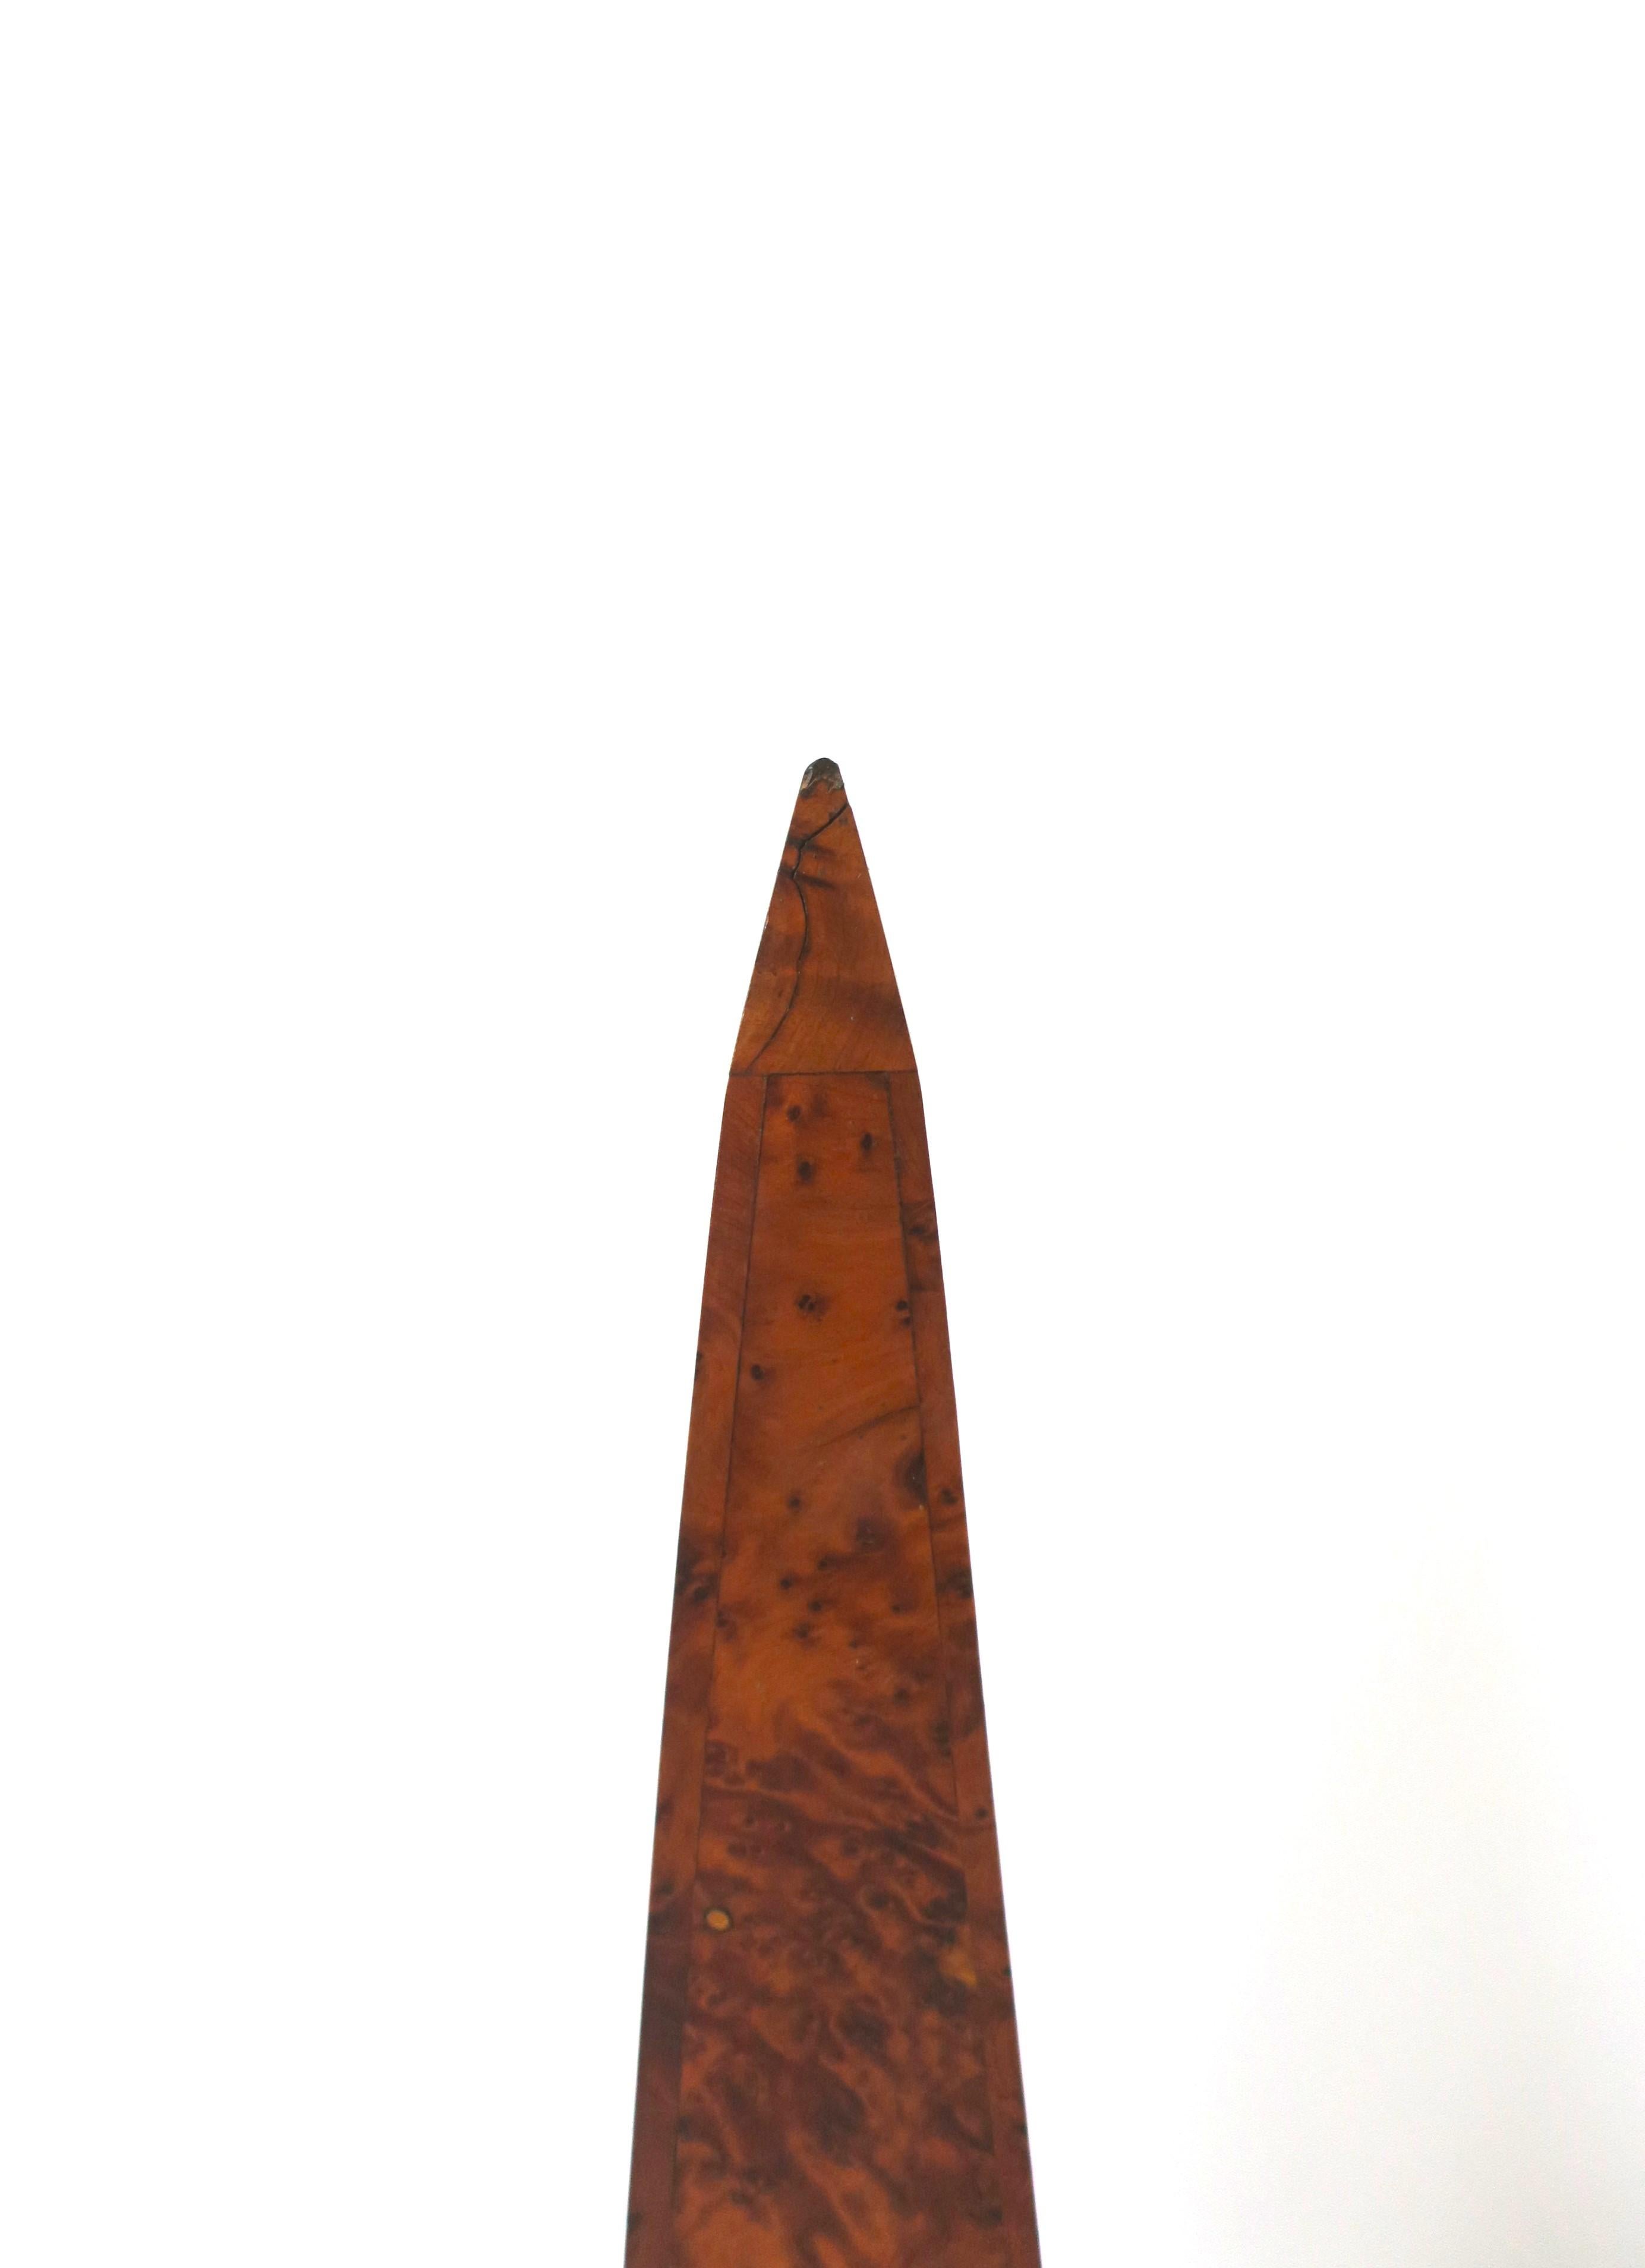 English Burl Wood Obelisk In Good Condition For Sale In New York, NY